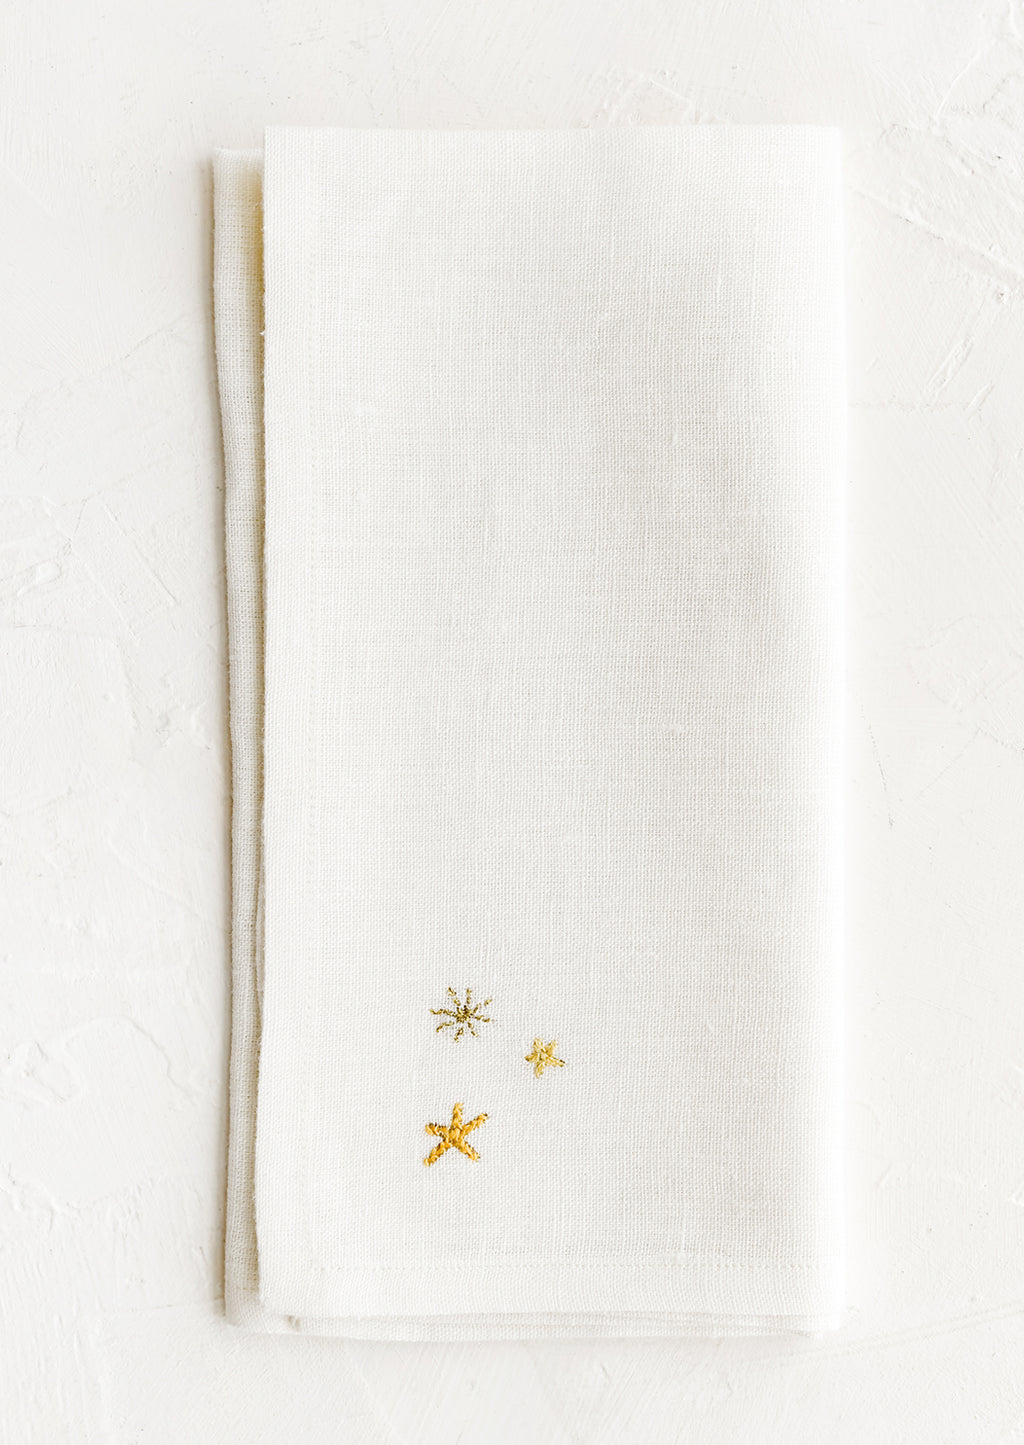 1: A white napkin with three embroidered stars.